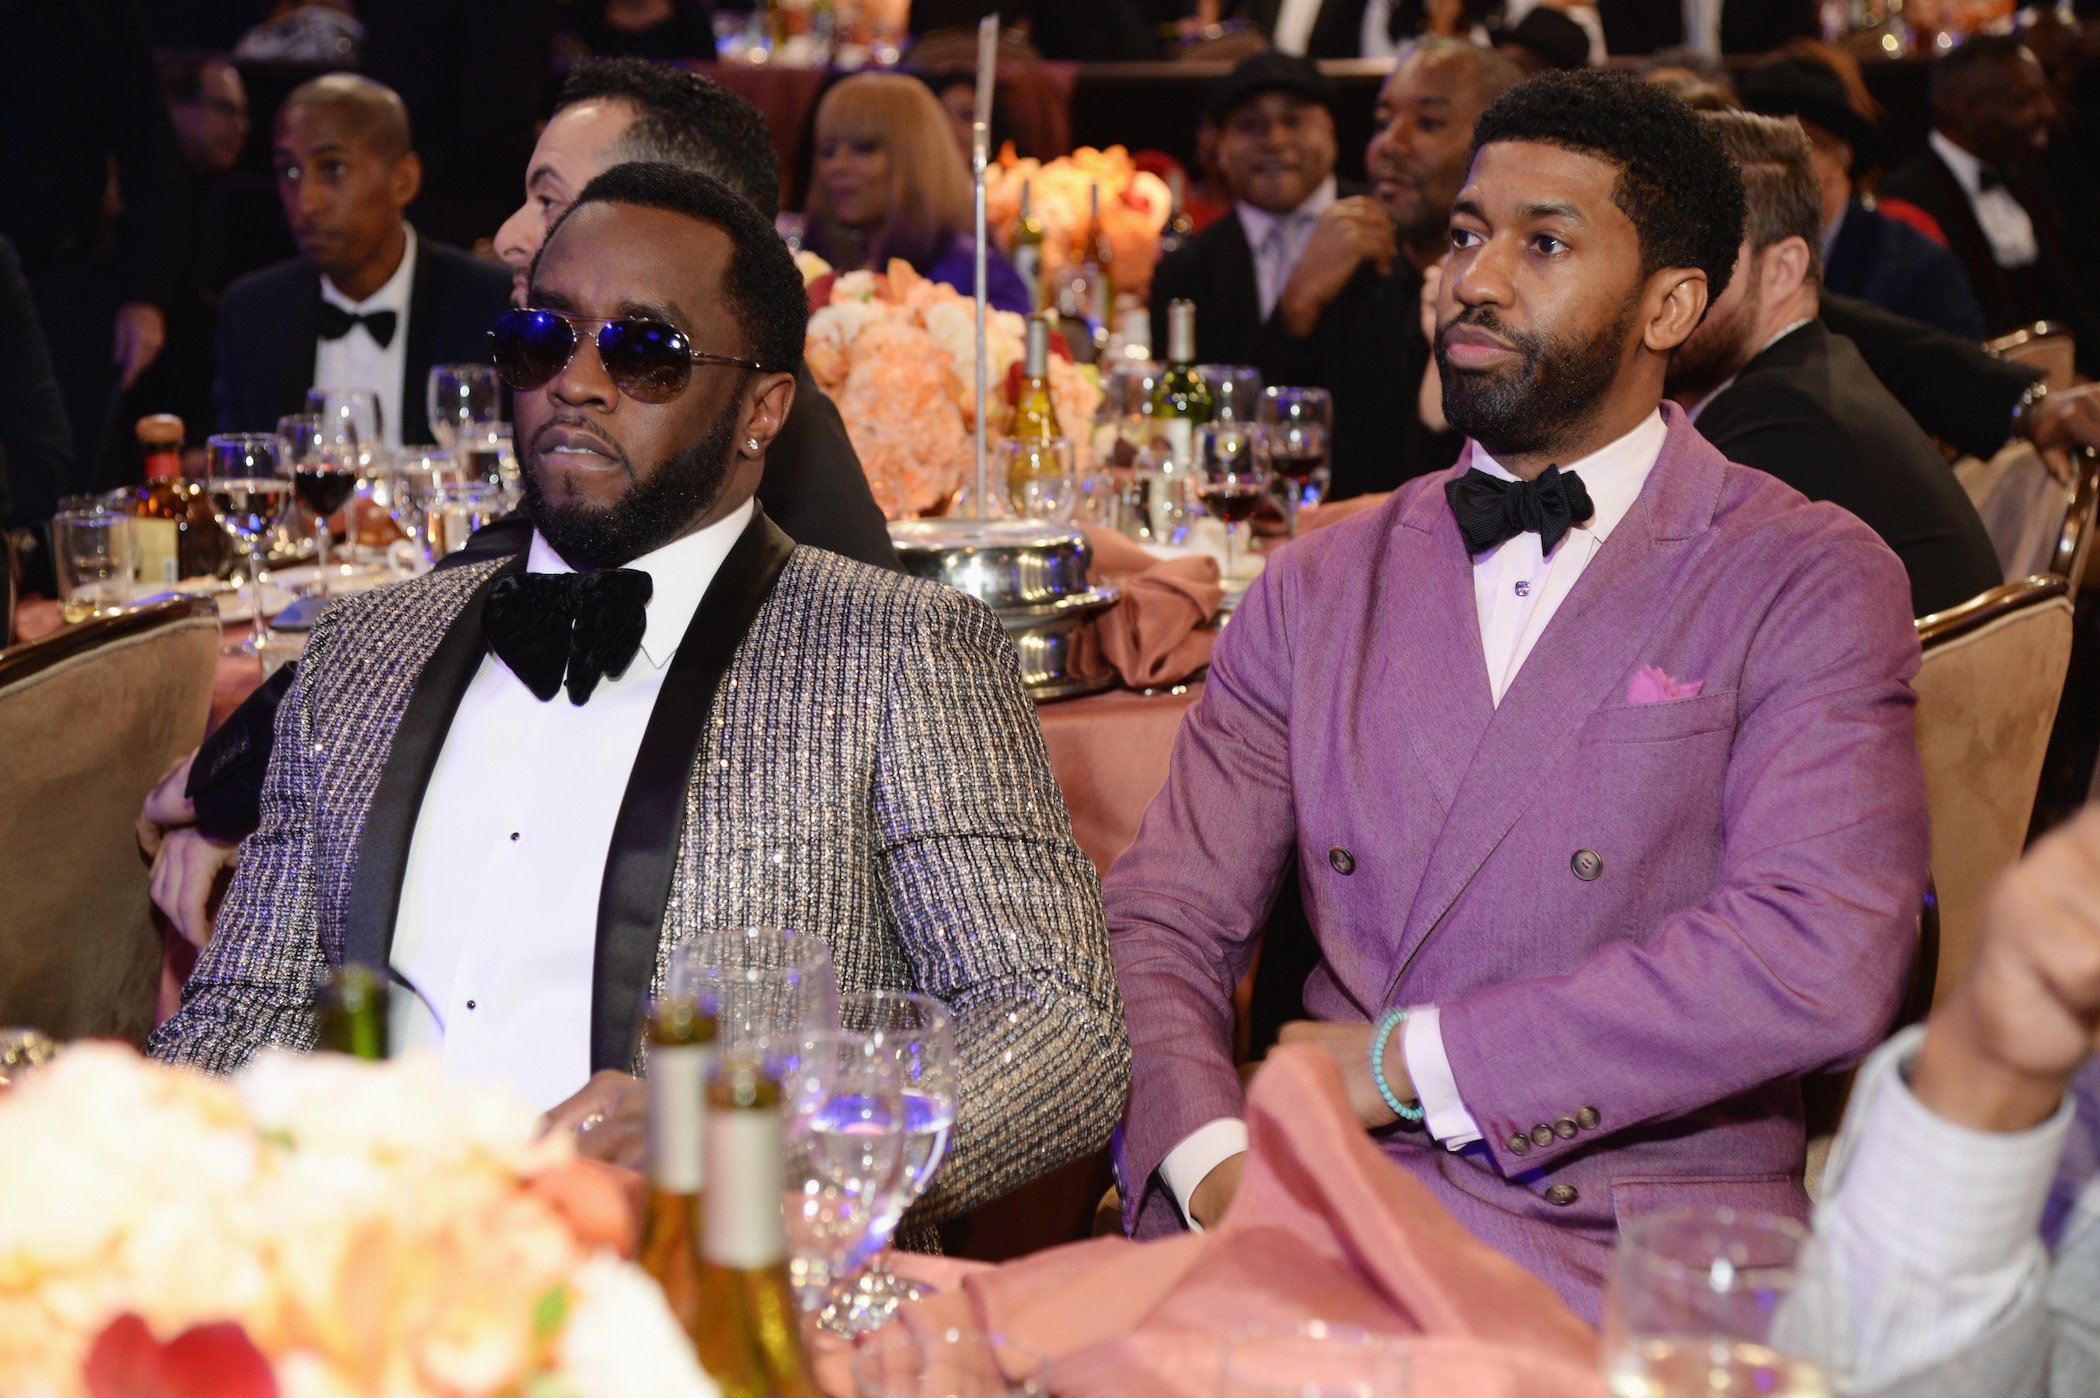 Diddy and his assistant Fonzworth Bentley sitting together at an event